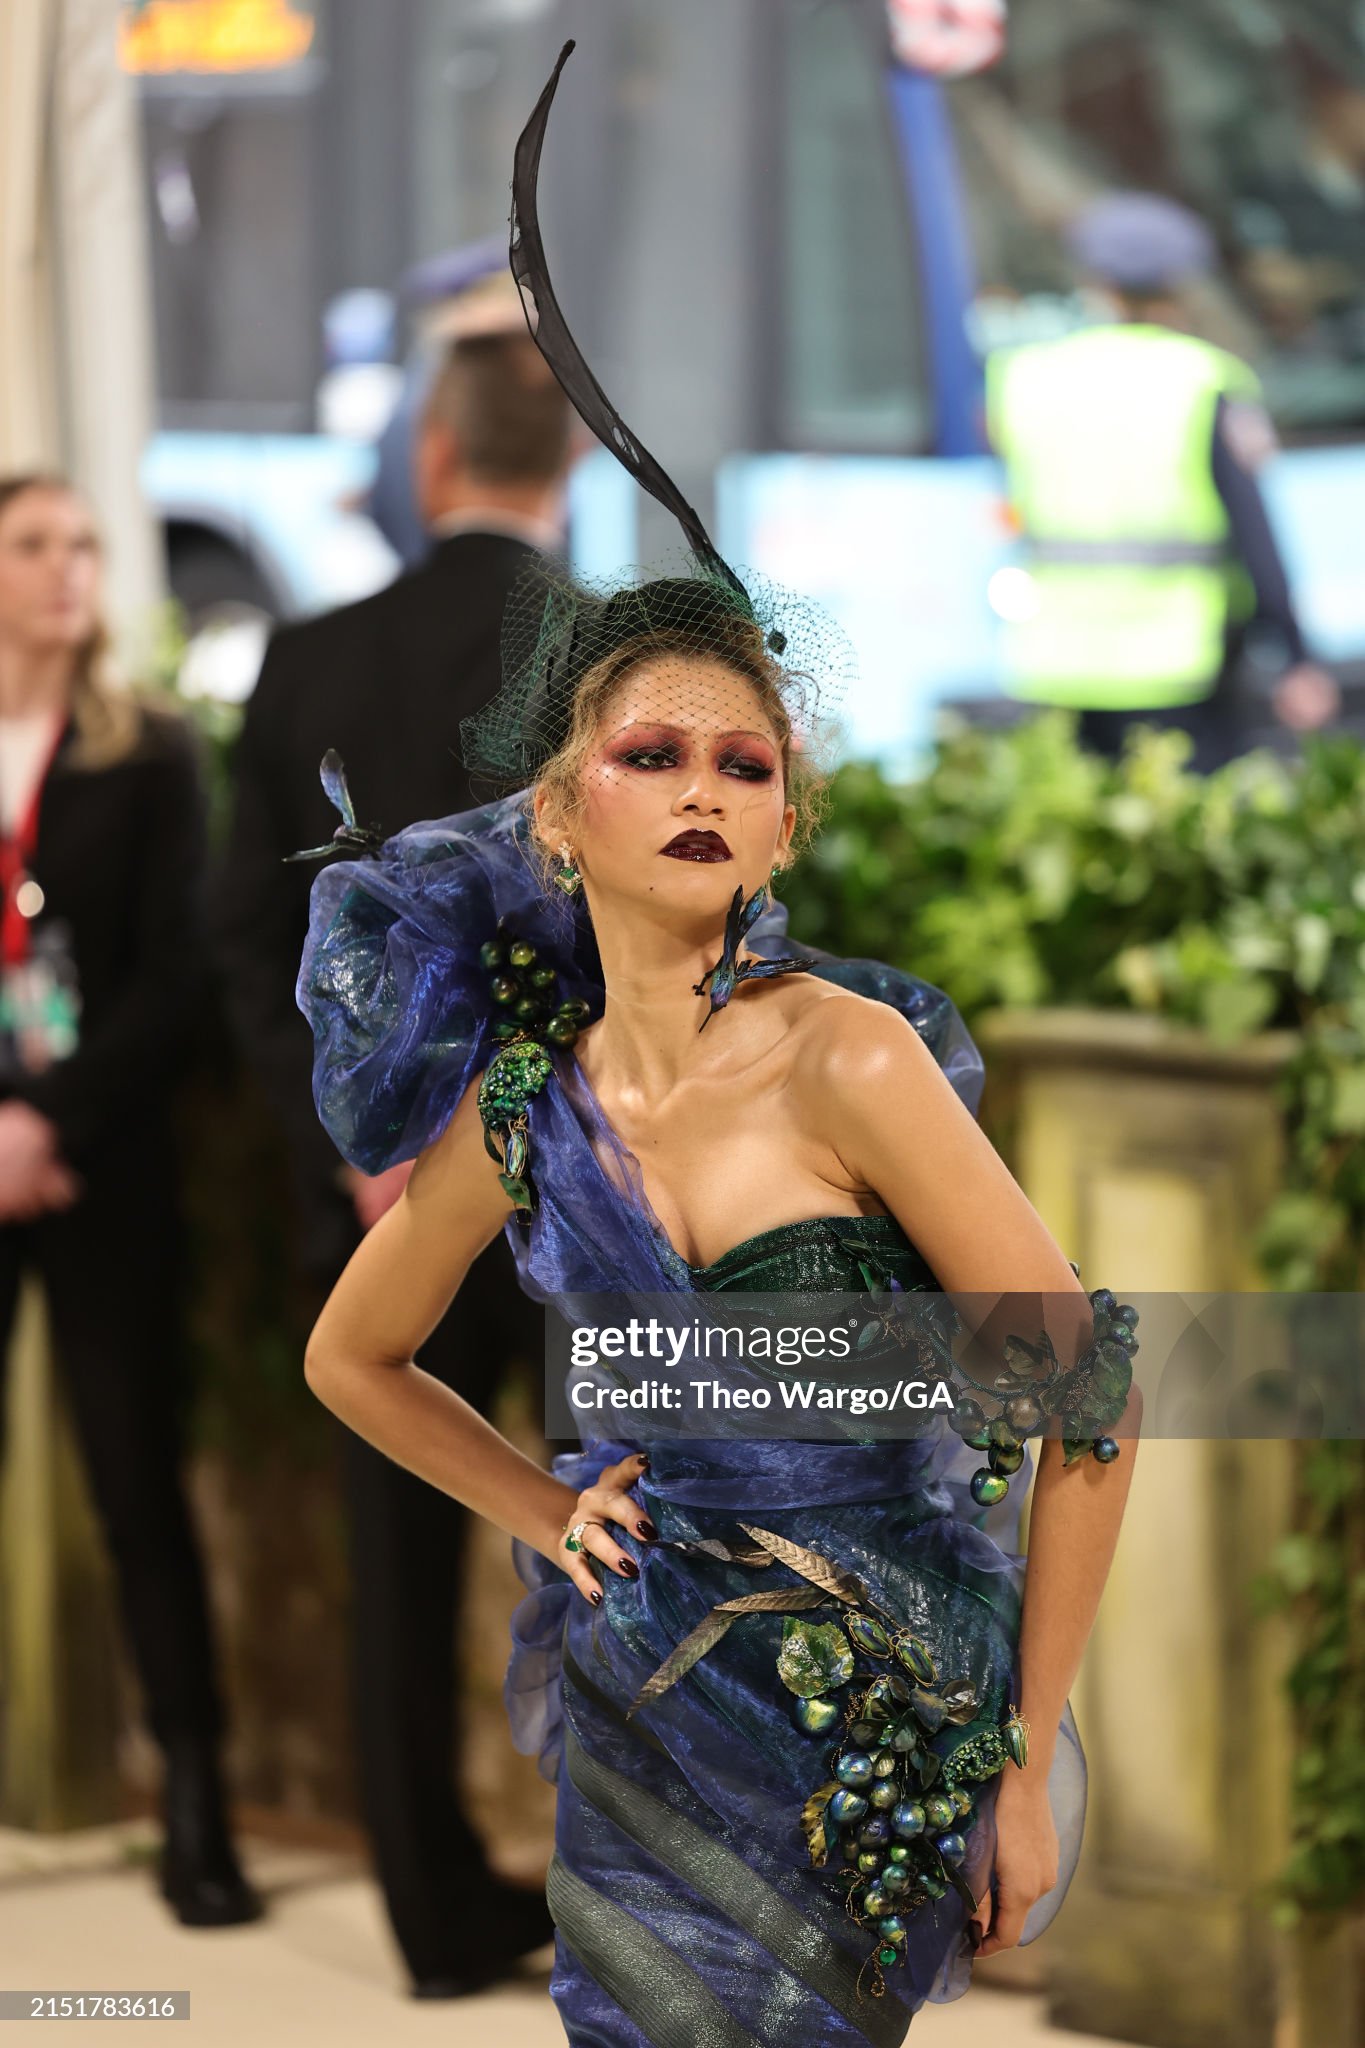 gettyimages-2151783616-2048x2048.jpg